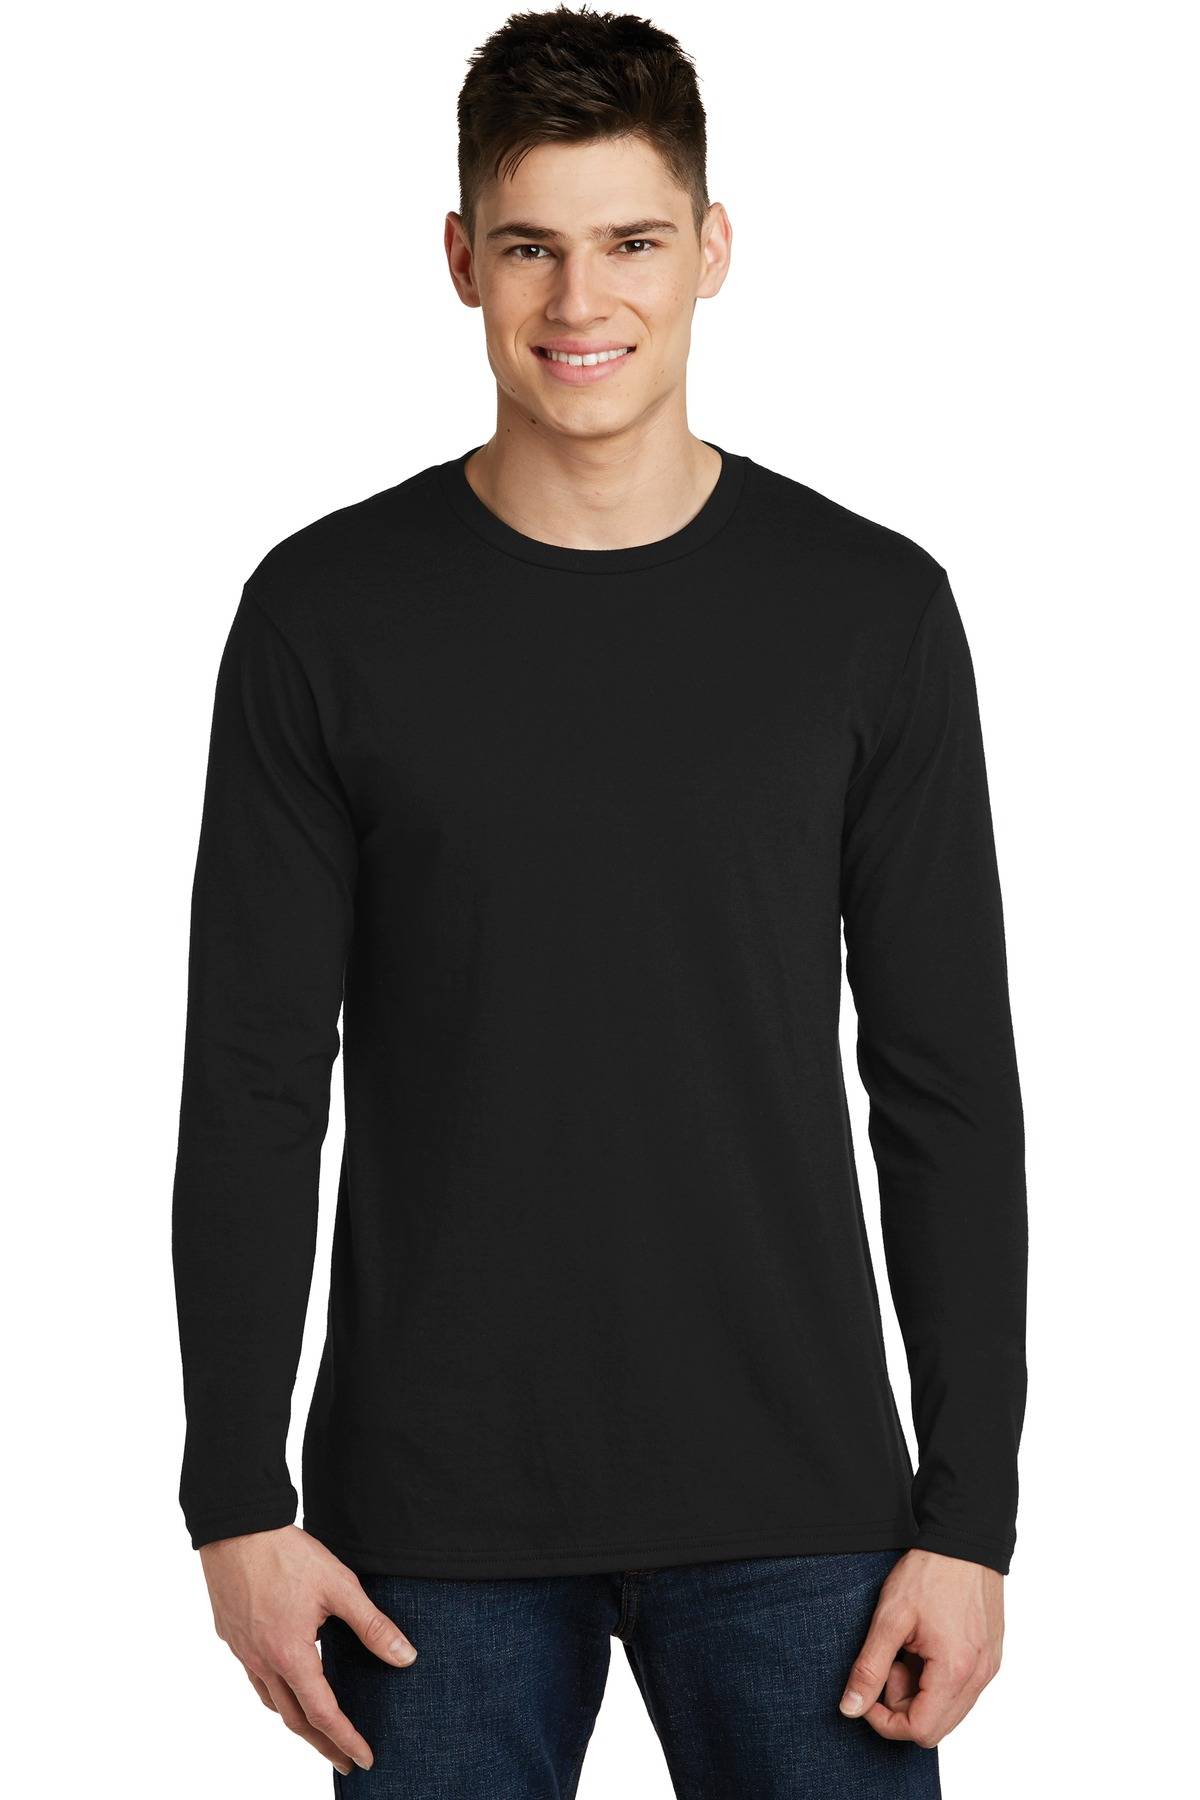 District DT6200 Young Mens Long Sleeve Very Important Crew Neck Stylish T-Shirt